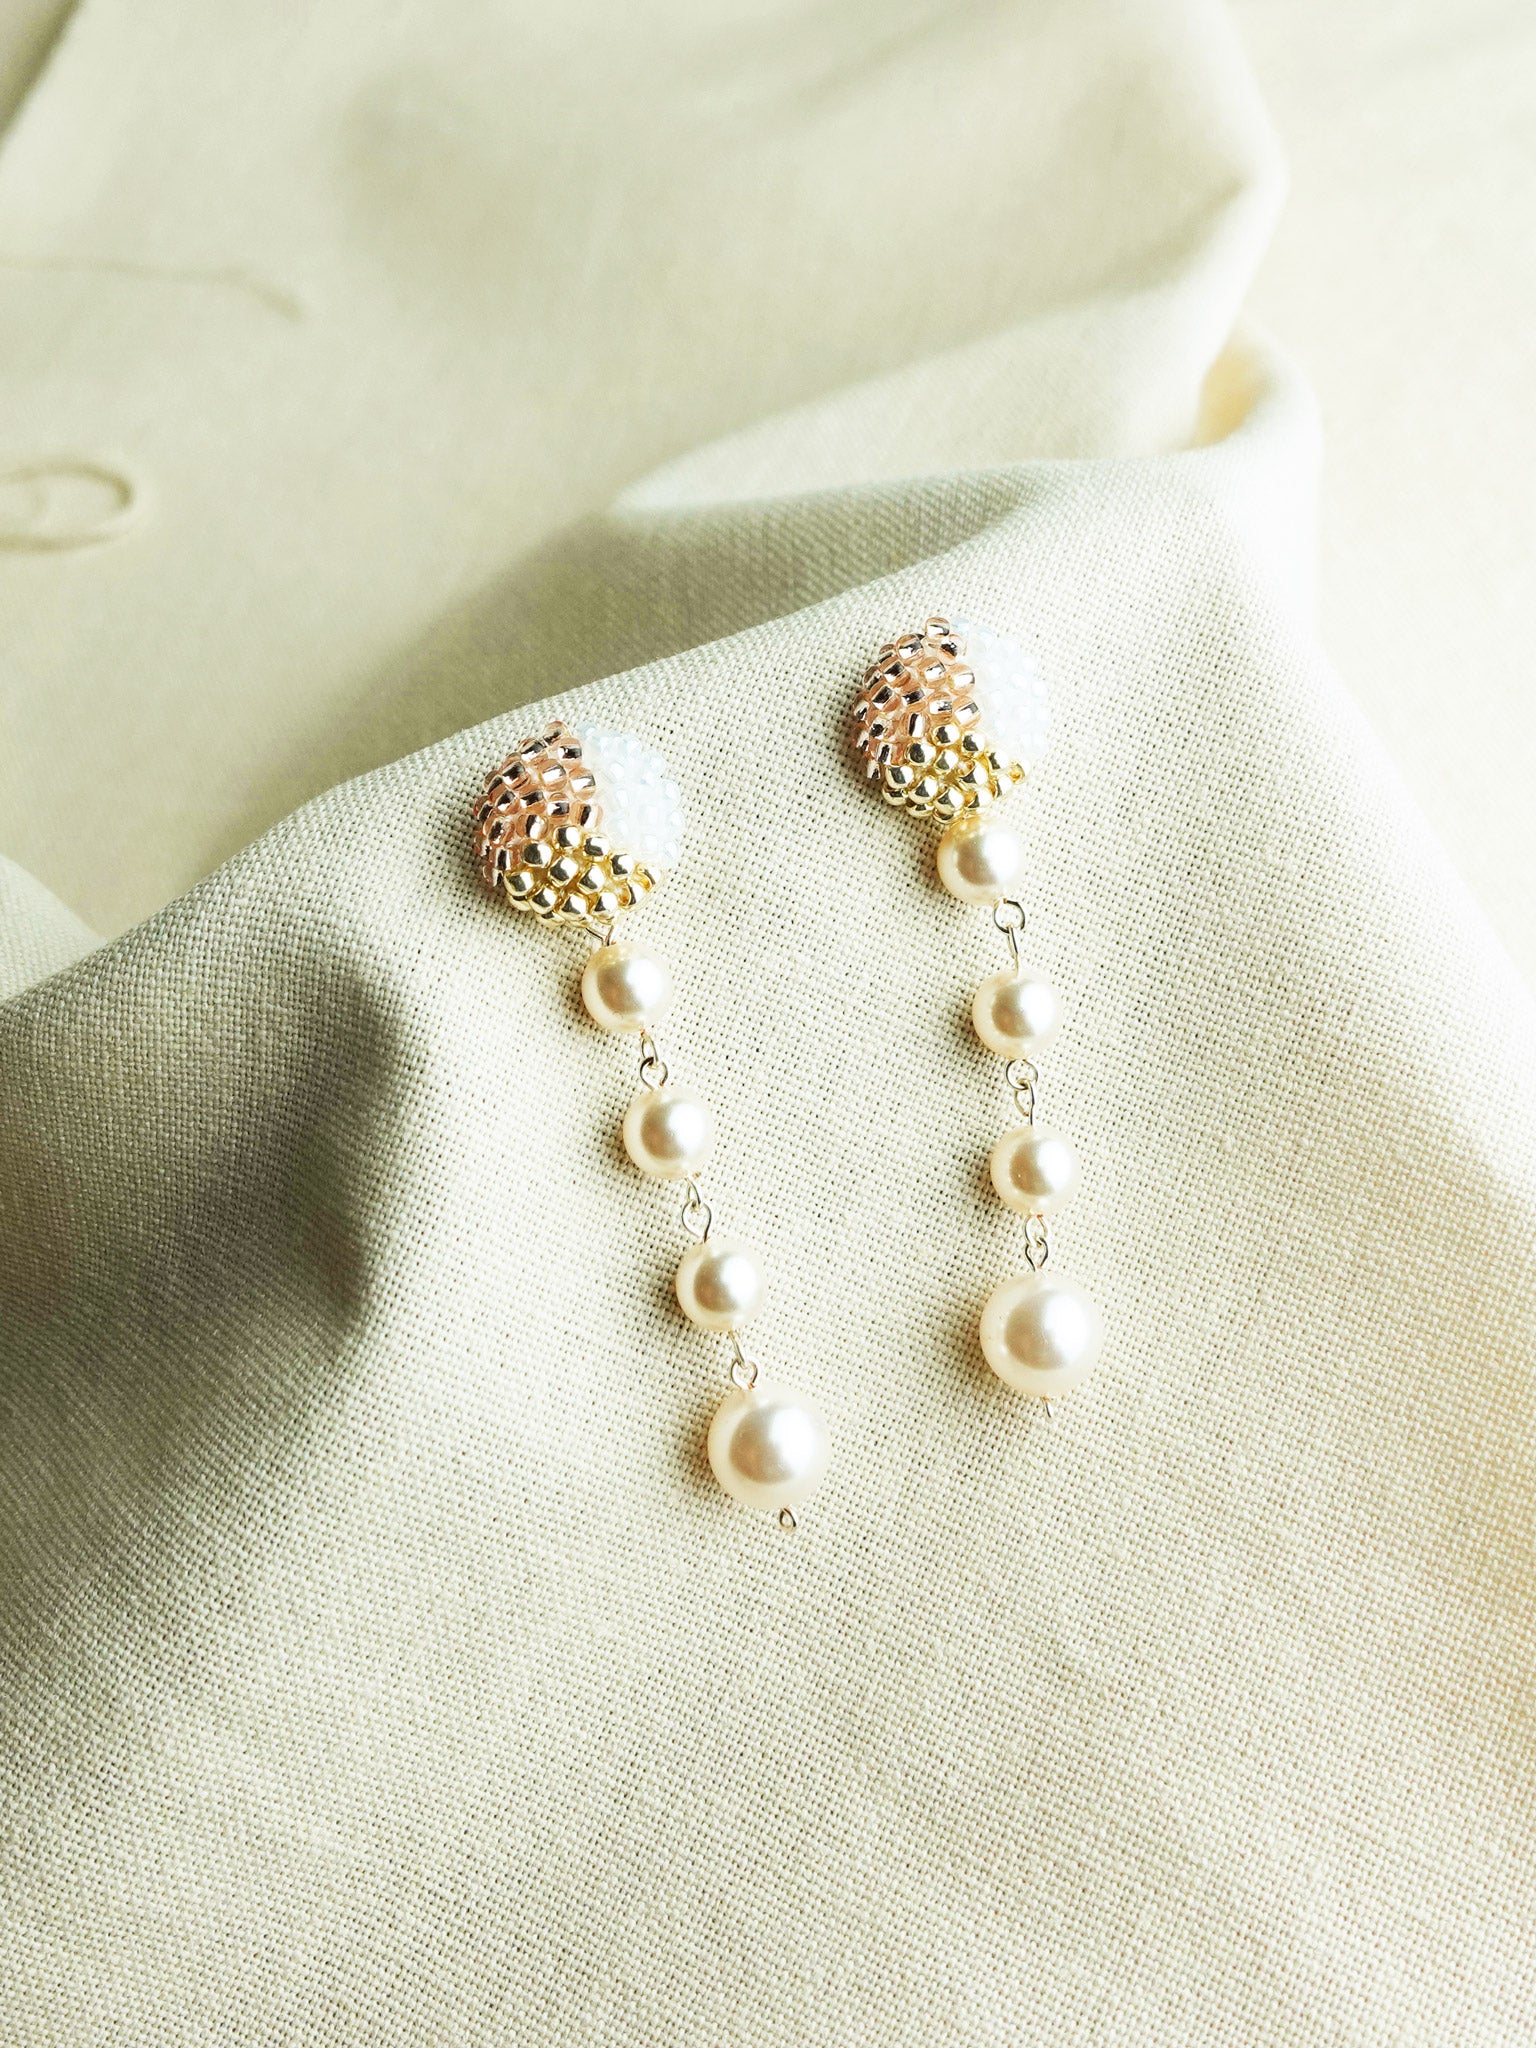 Thea Trio Earrings in Champagne Pink Left